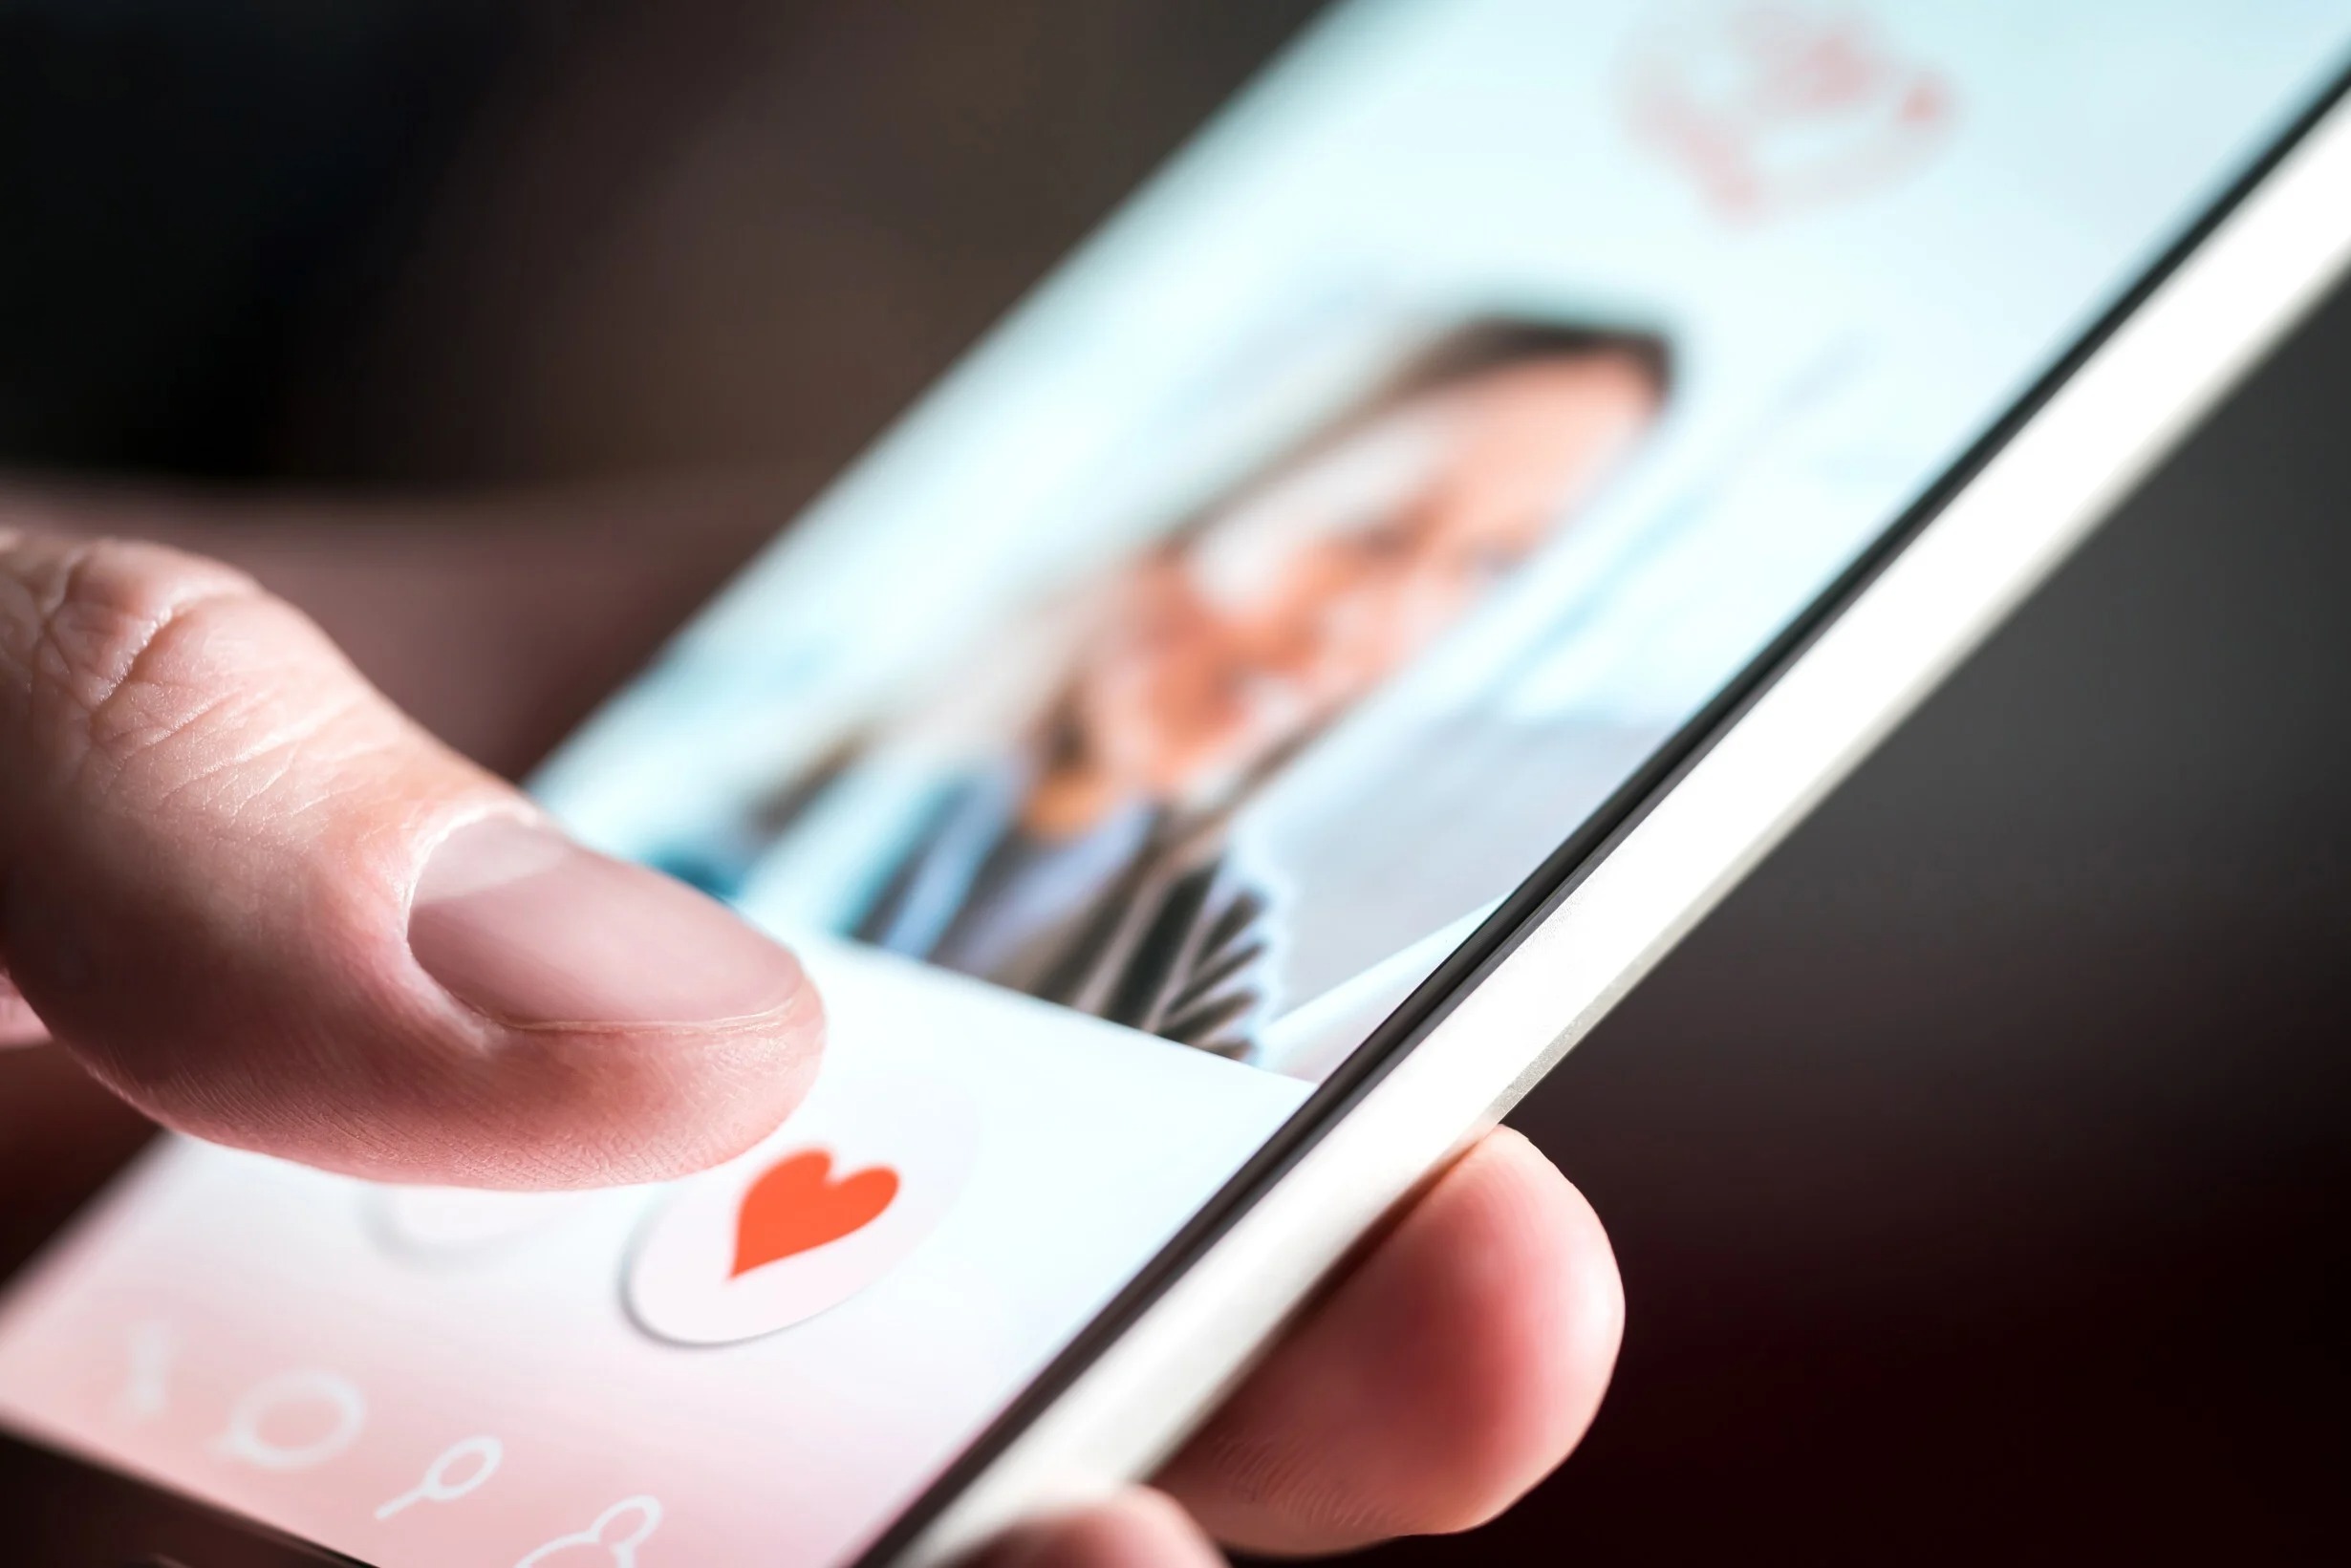 the-crown-dating-app-from-match-group-gamifies-dating